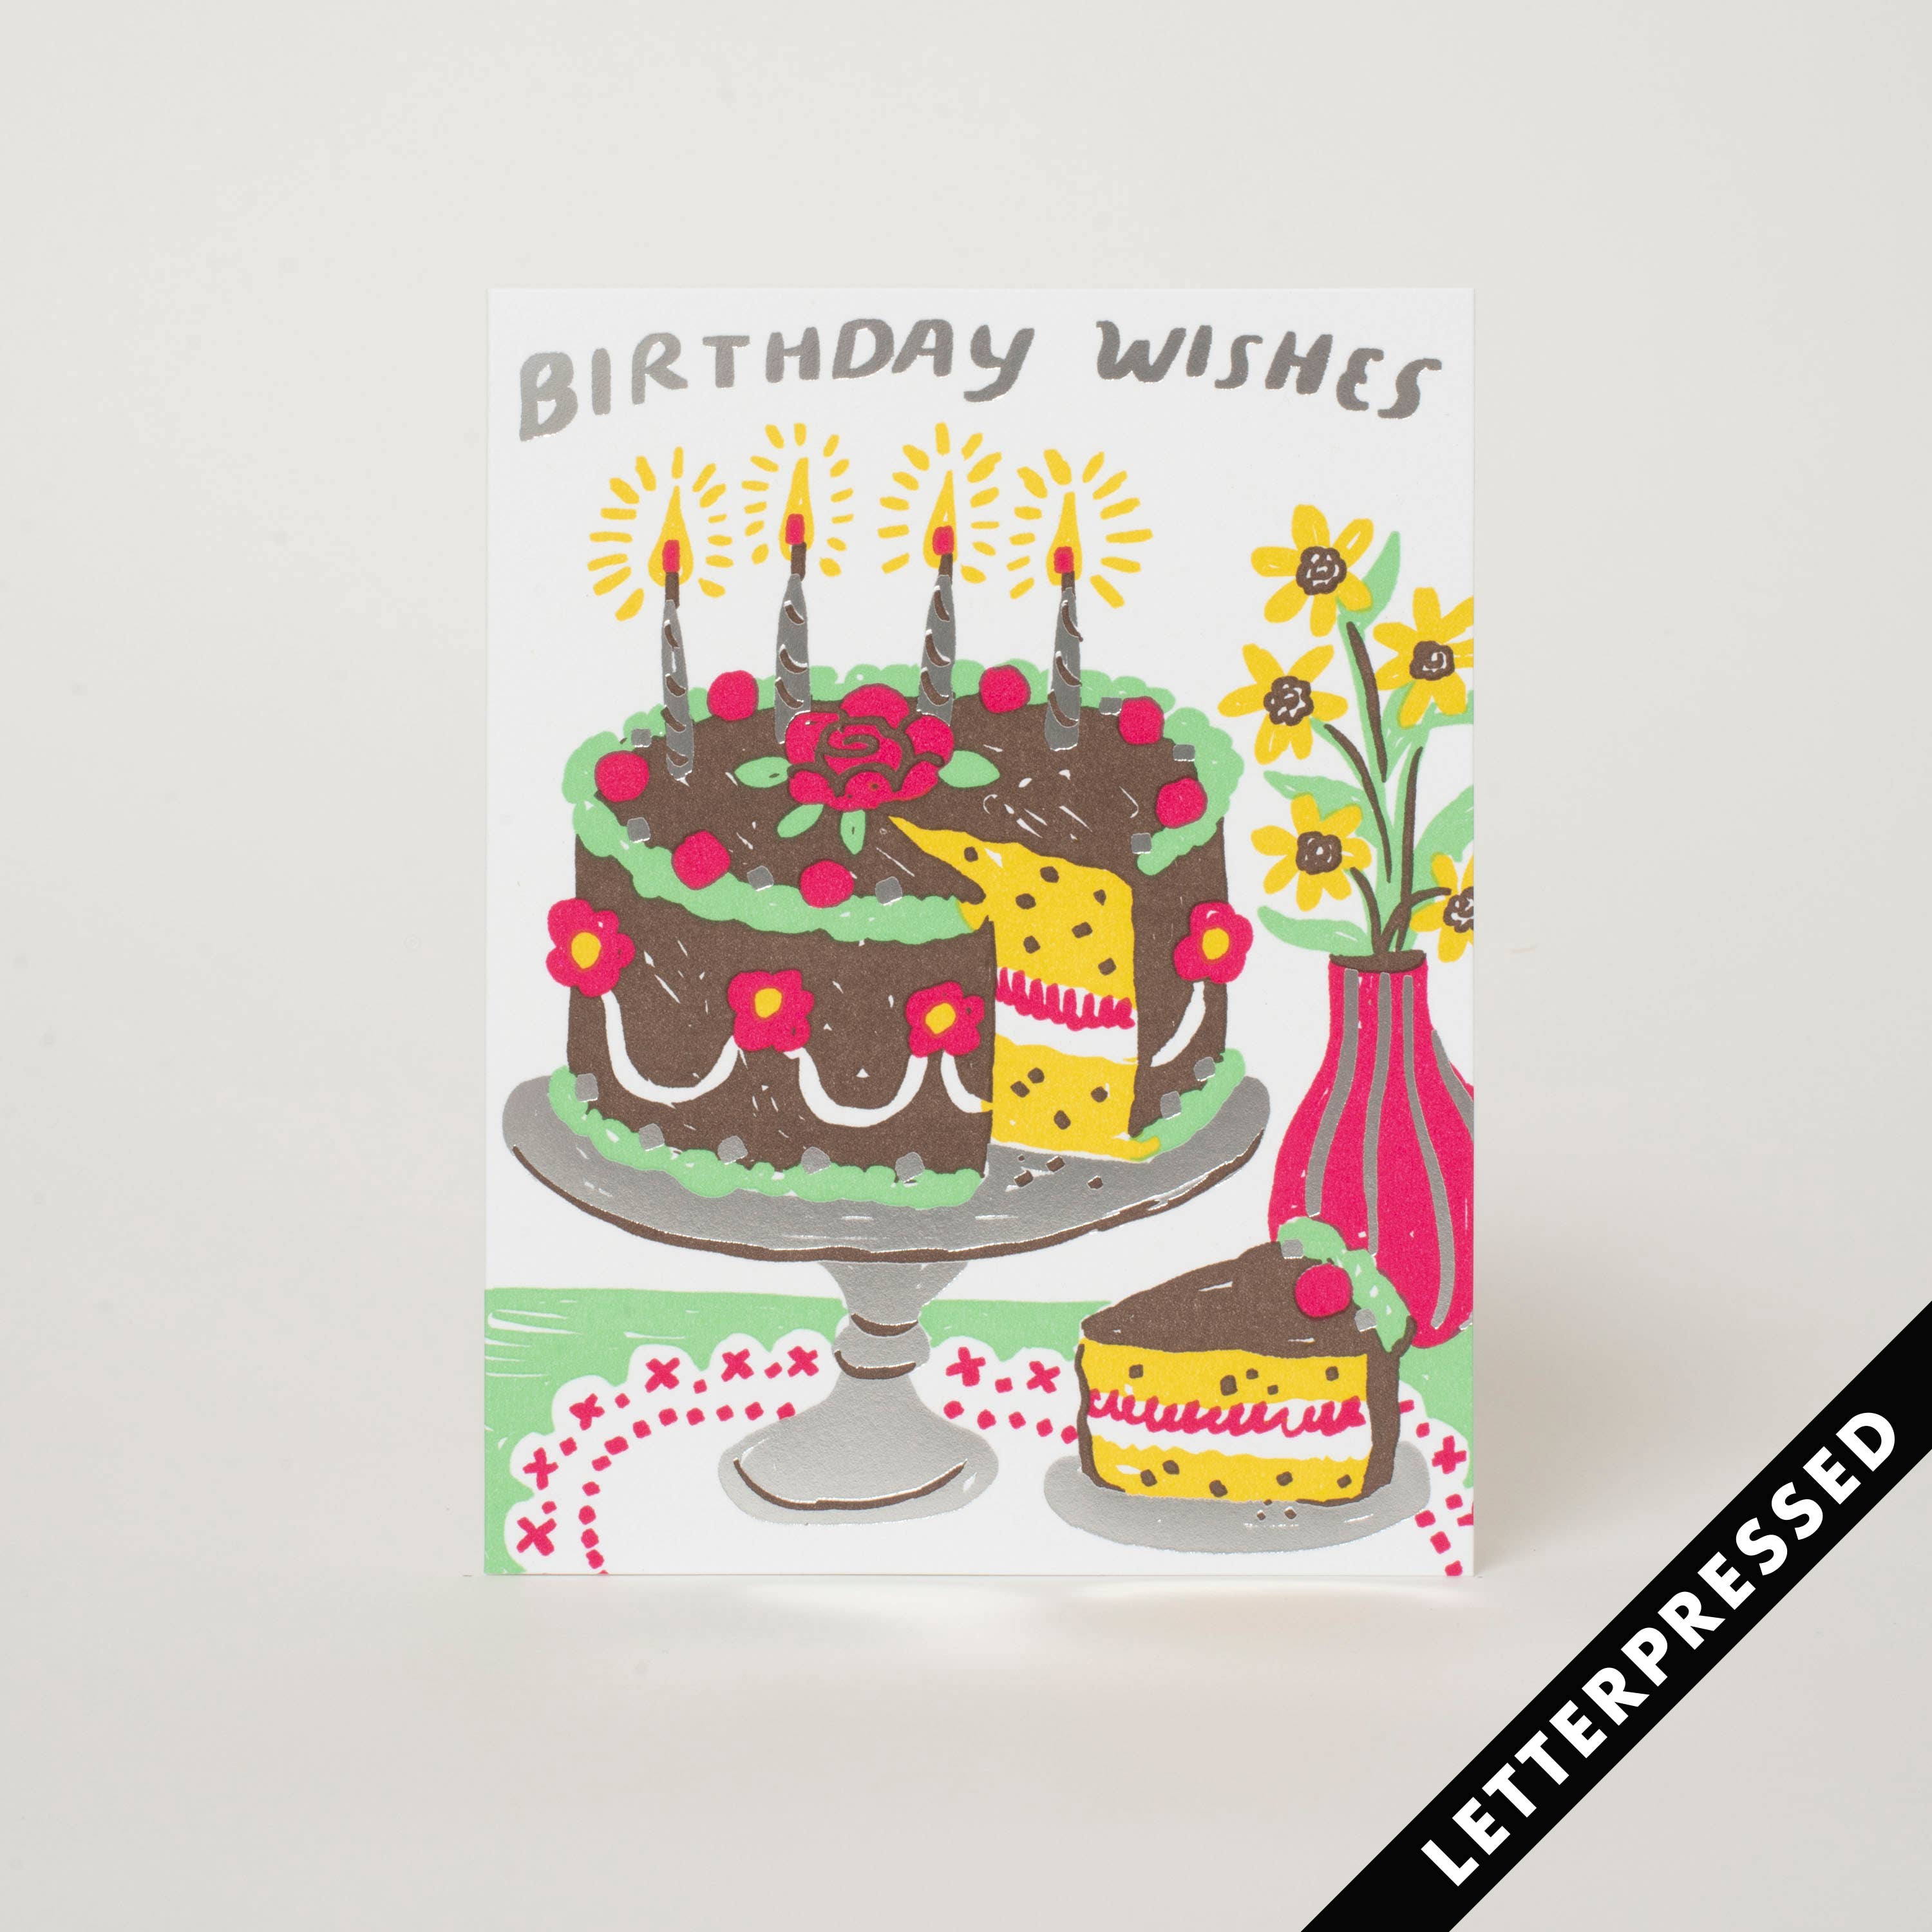 Egg Press Manufacturing - PHOEBE WAHL -- Birthday Cake Wishes: Paper tab